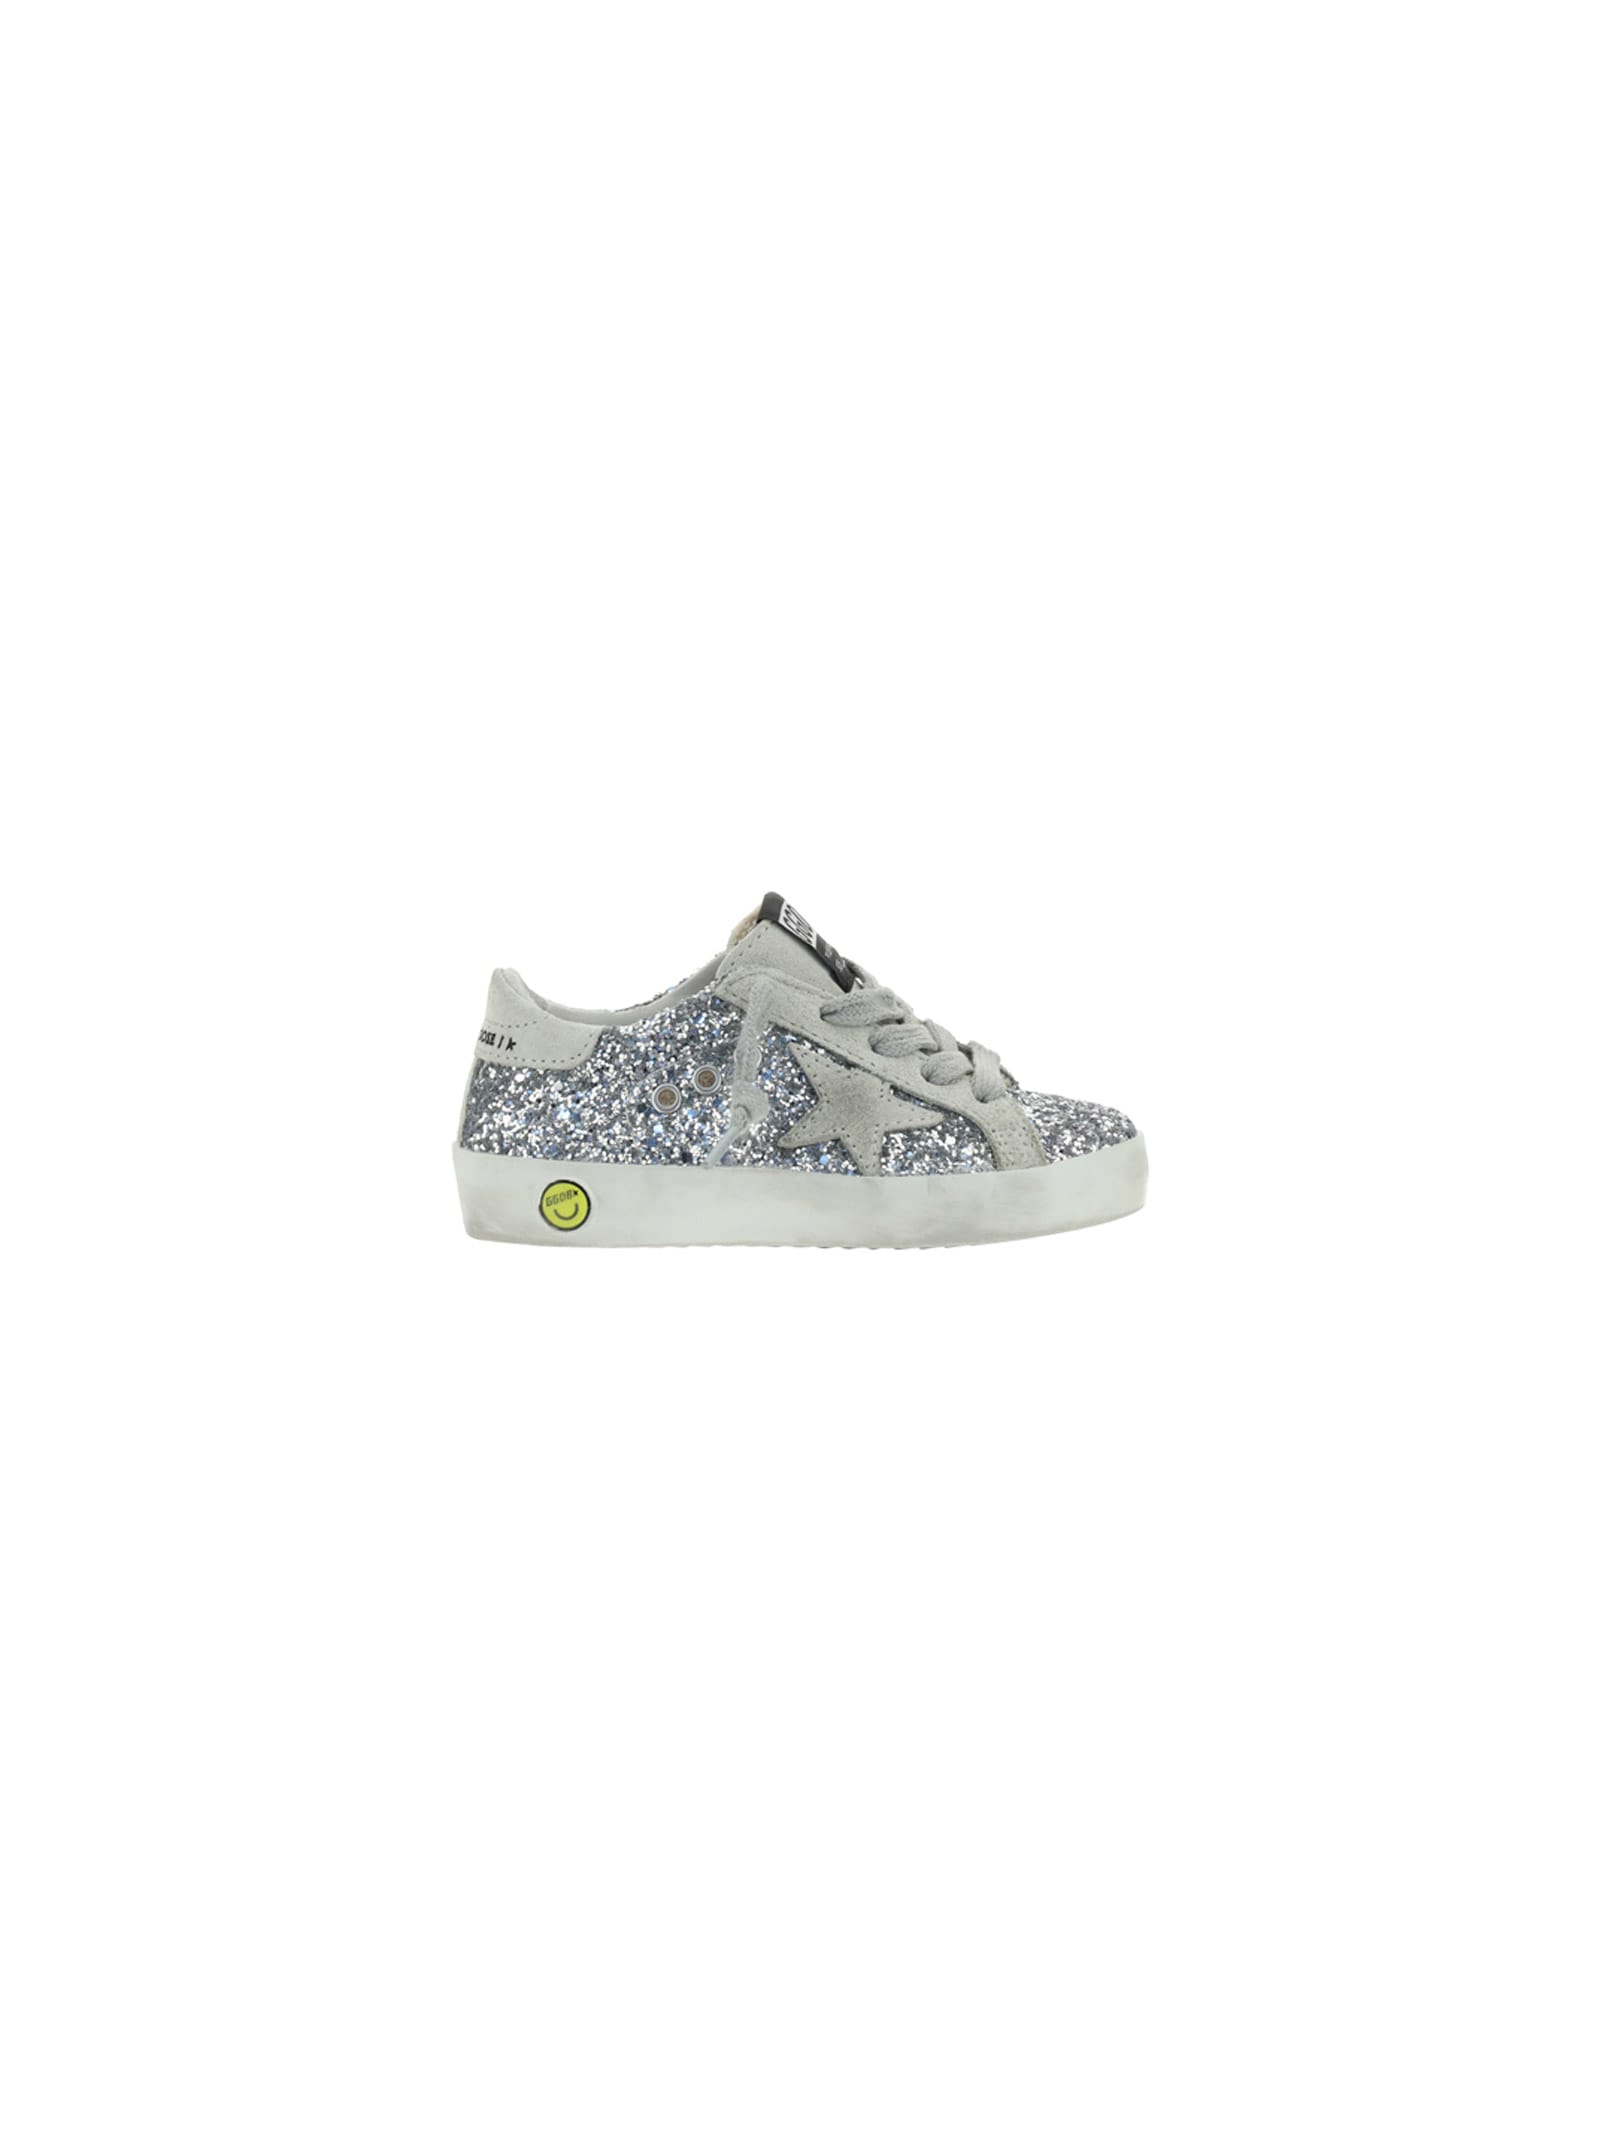 Rotere th Begravelse Shop Golden Goose Super Star Sneakers For Girl In Silver/ice